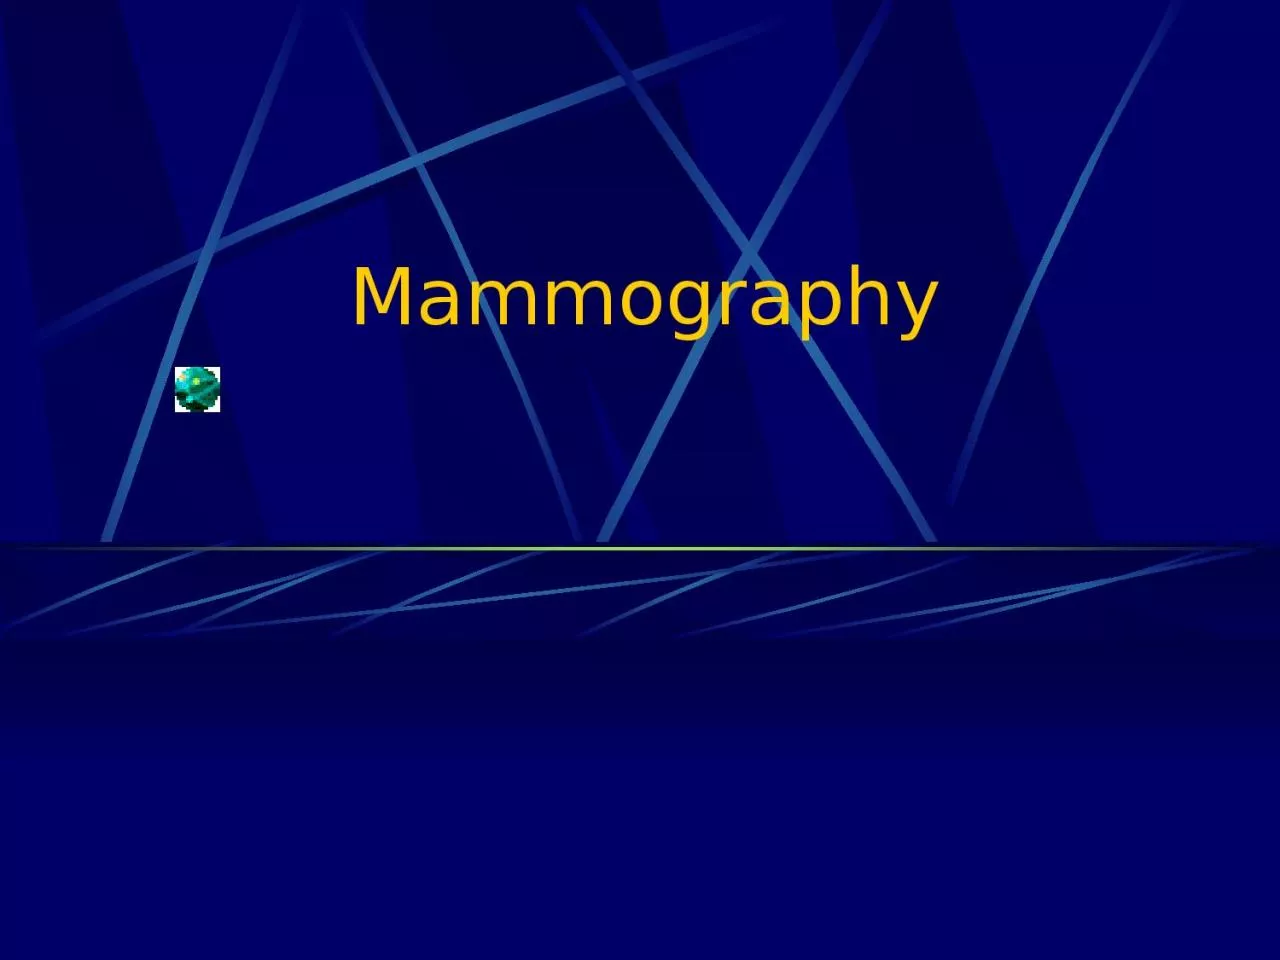 Mammography Introduction